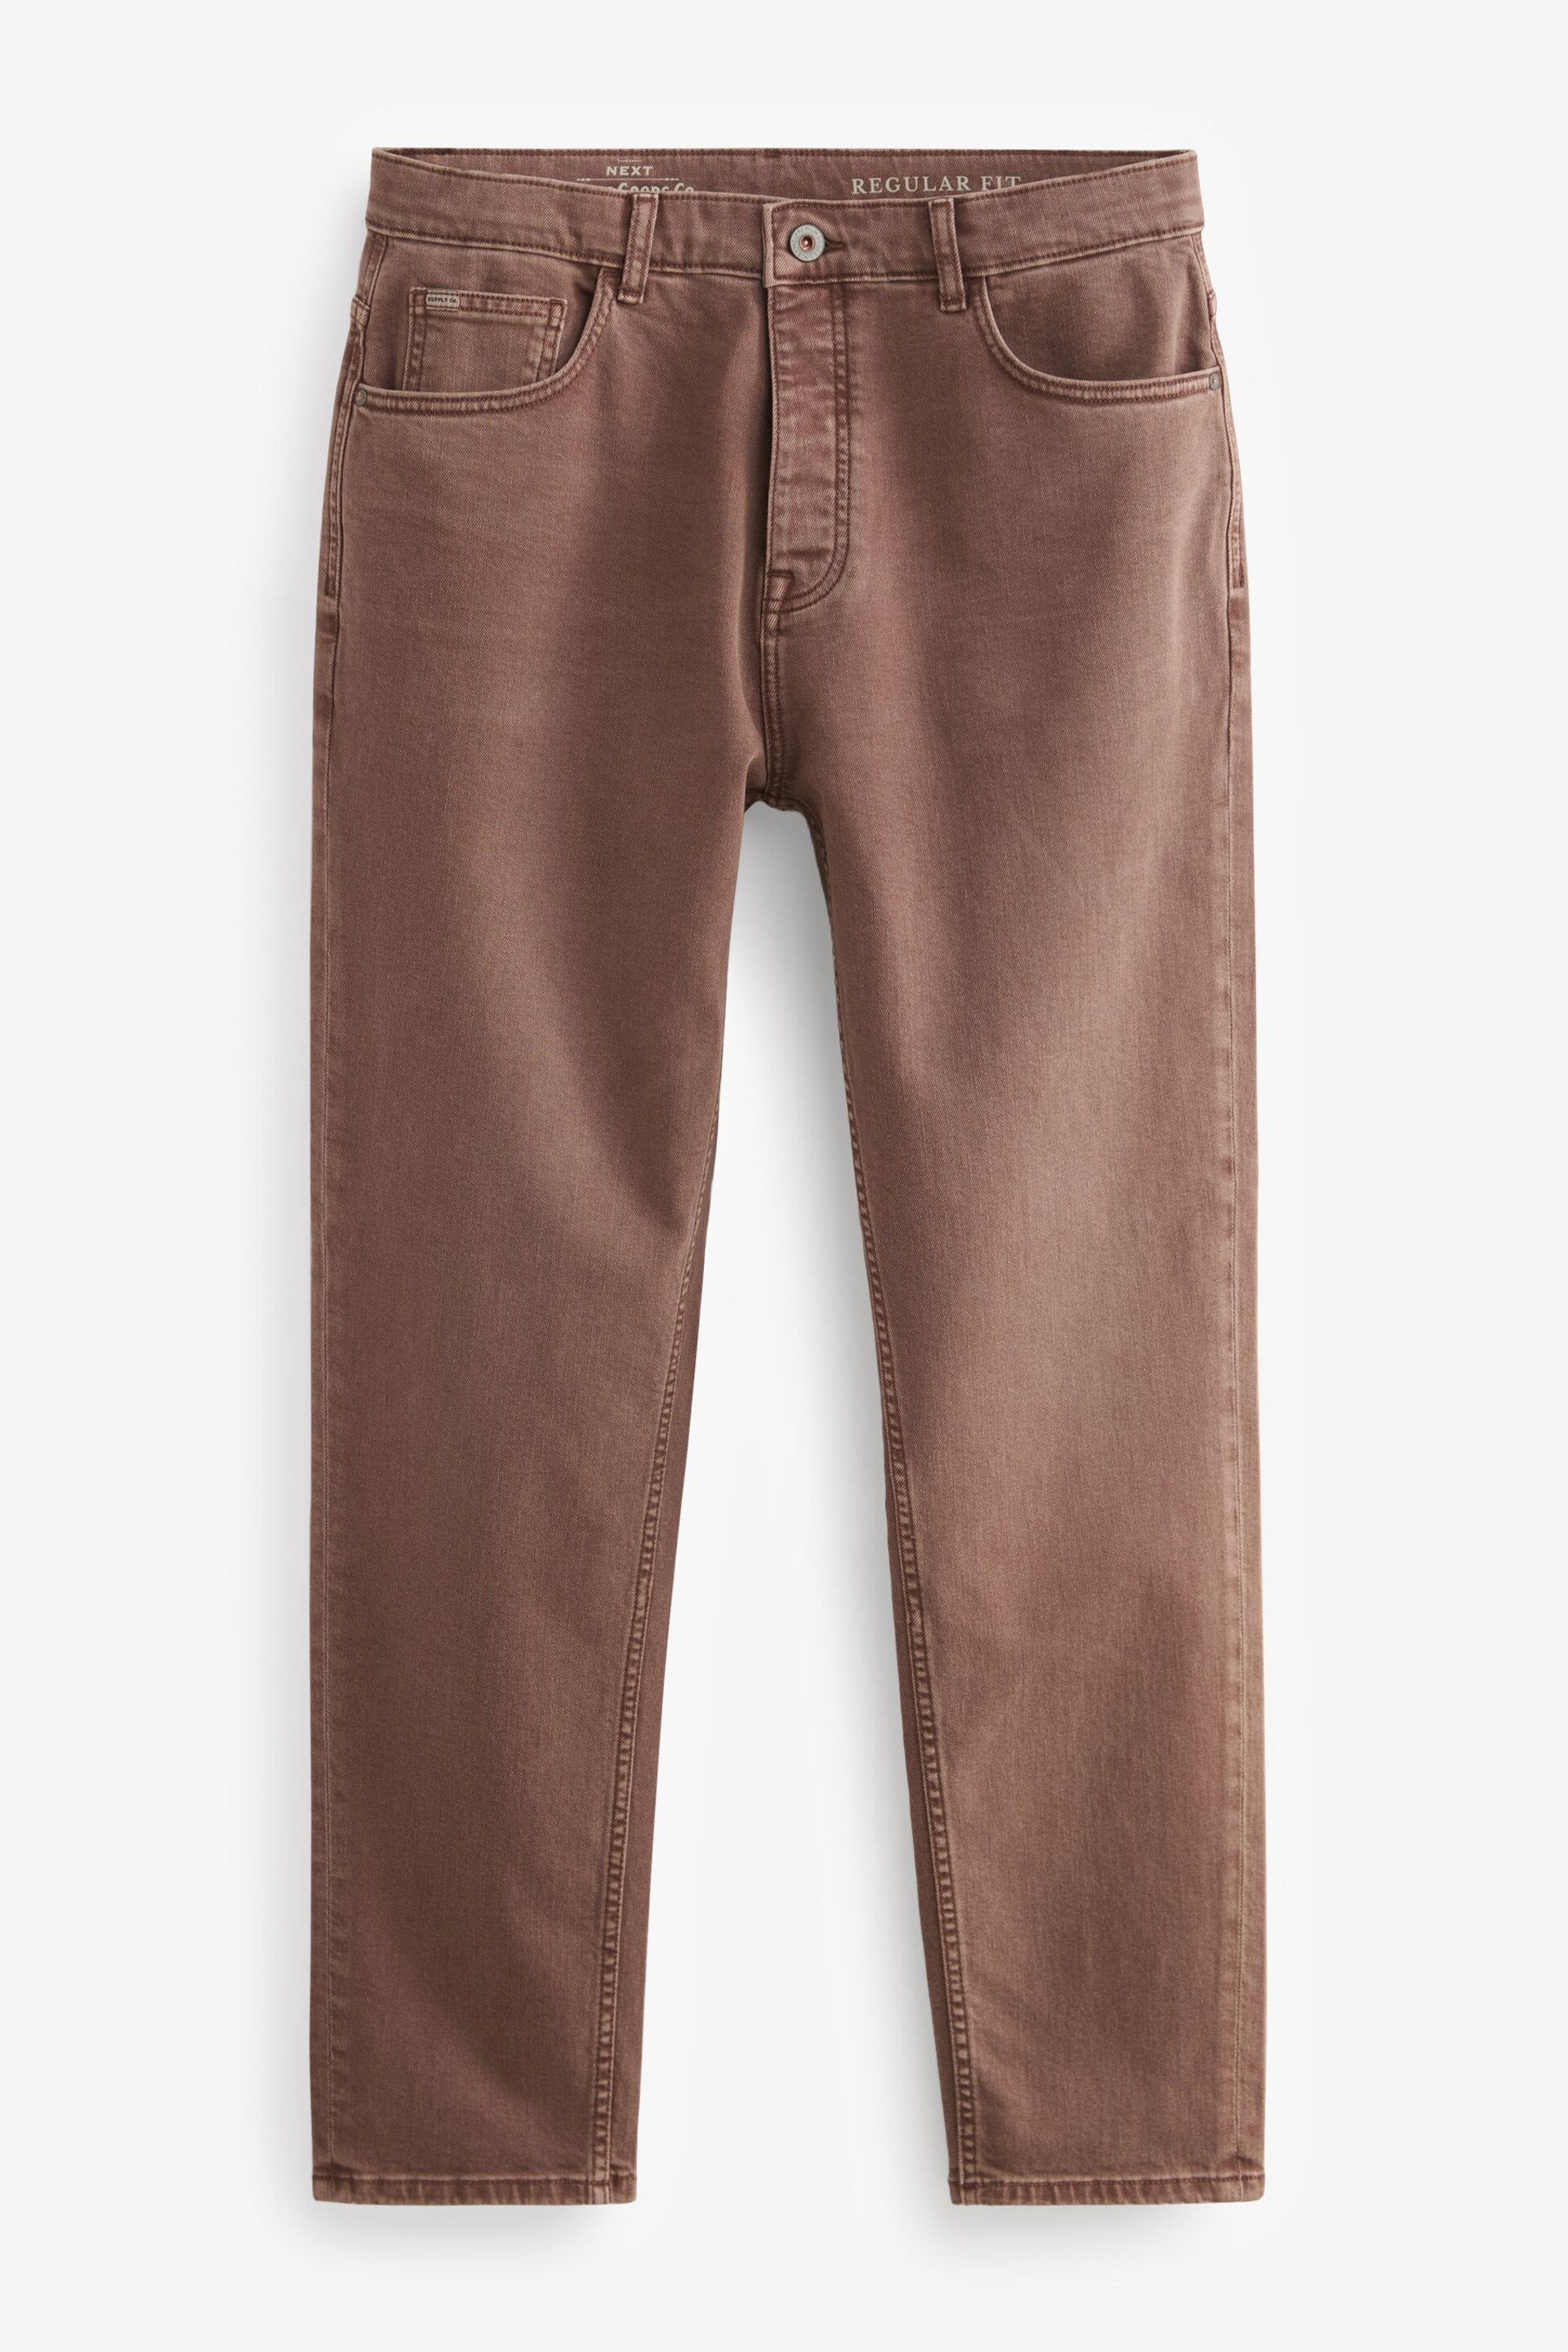 Brown Rust Regular Fit Overdyed Denim Jeans - Image 7 of 8